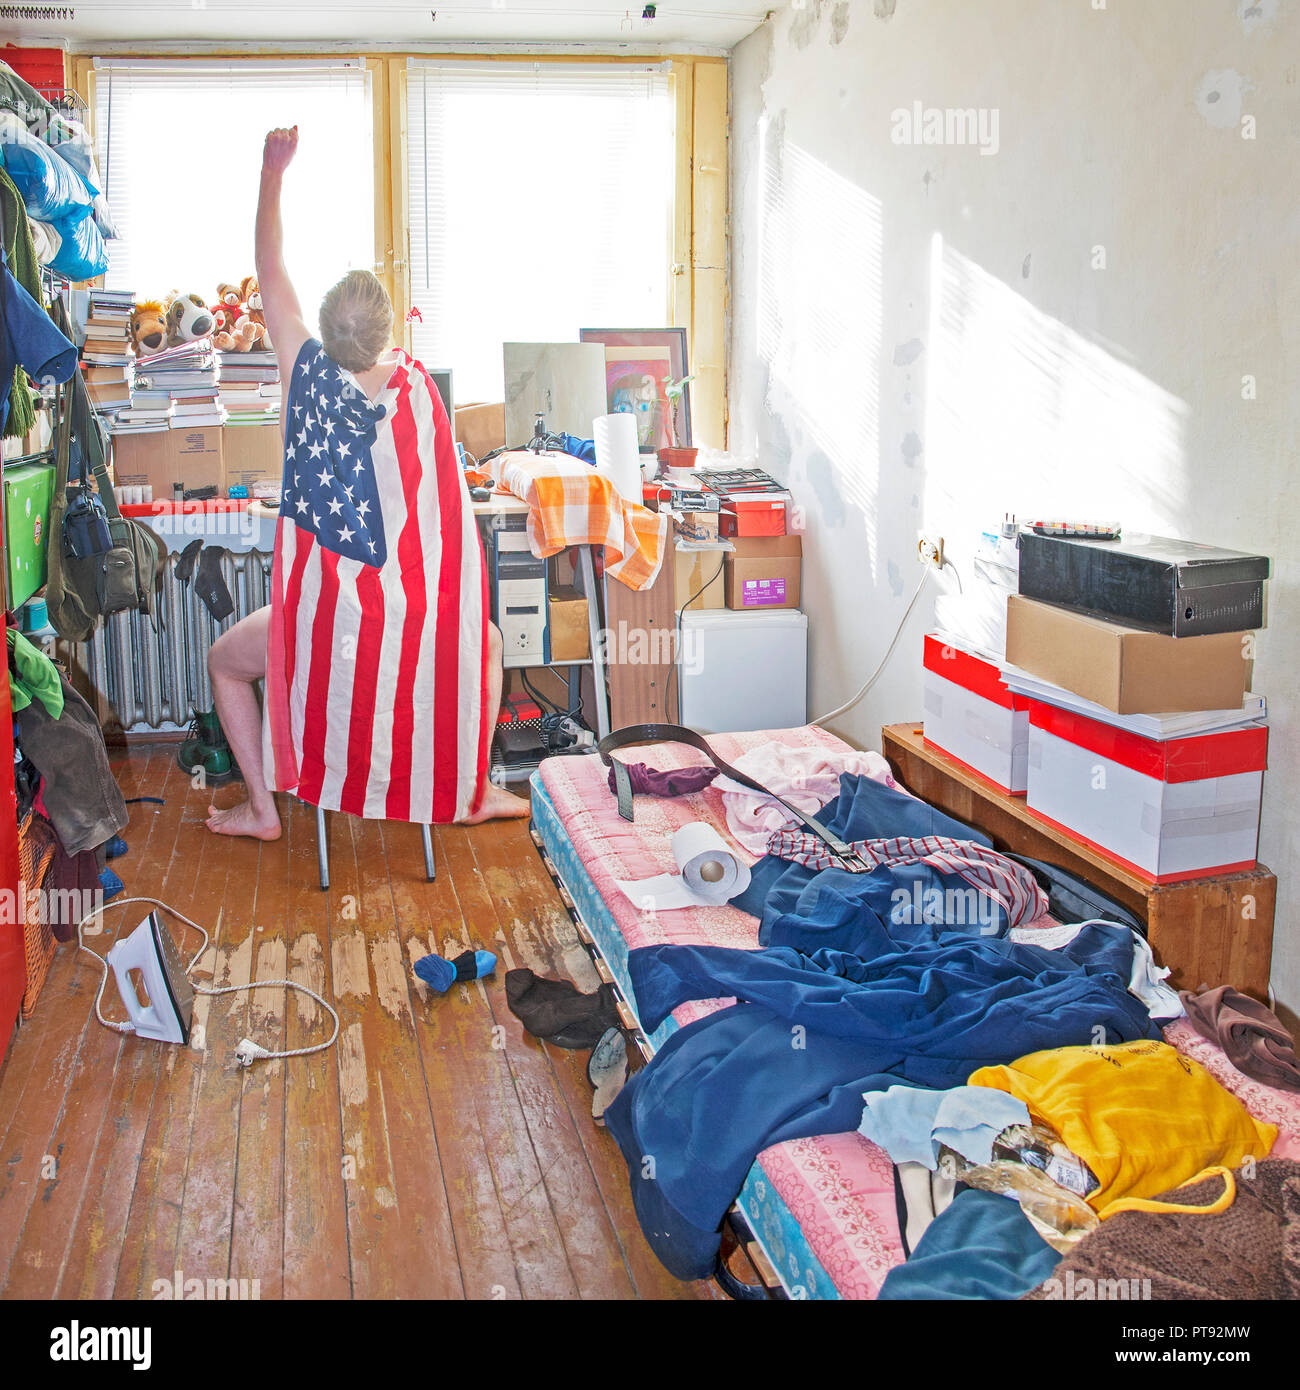 Messy superman's room. Piles of clothes, boxes, books Stock Photo